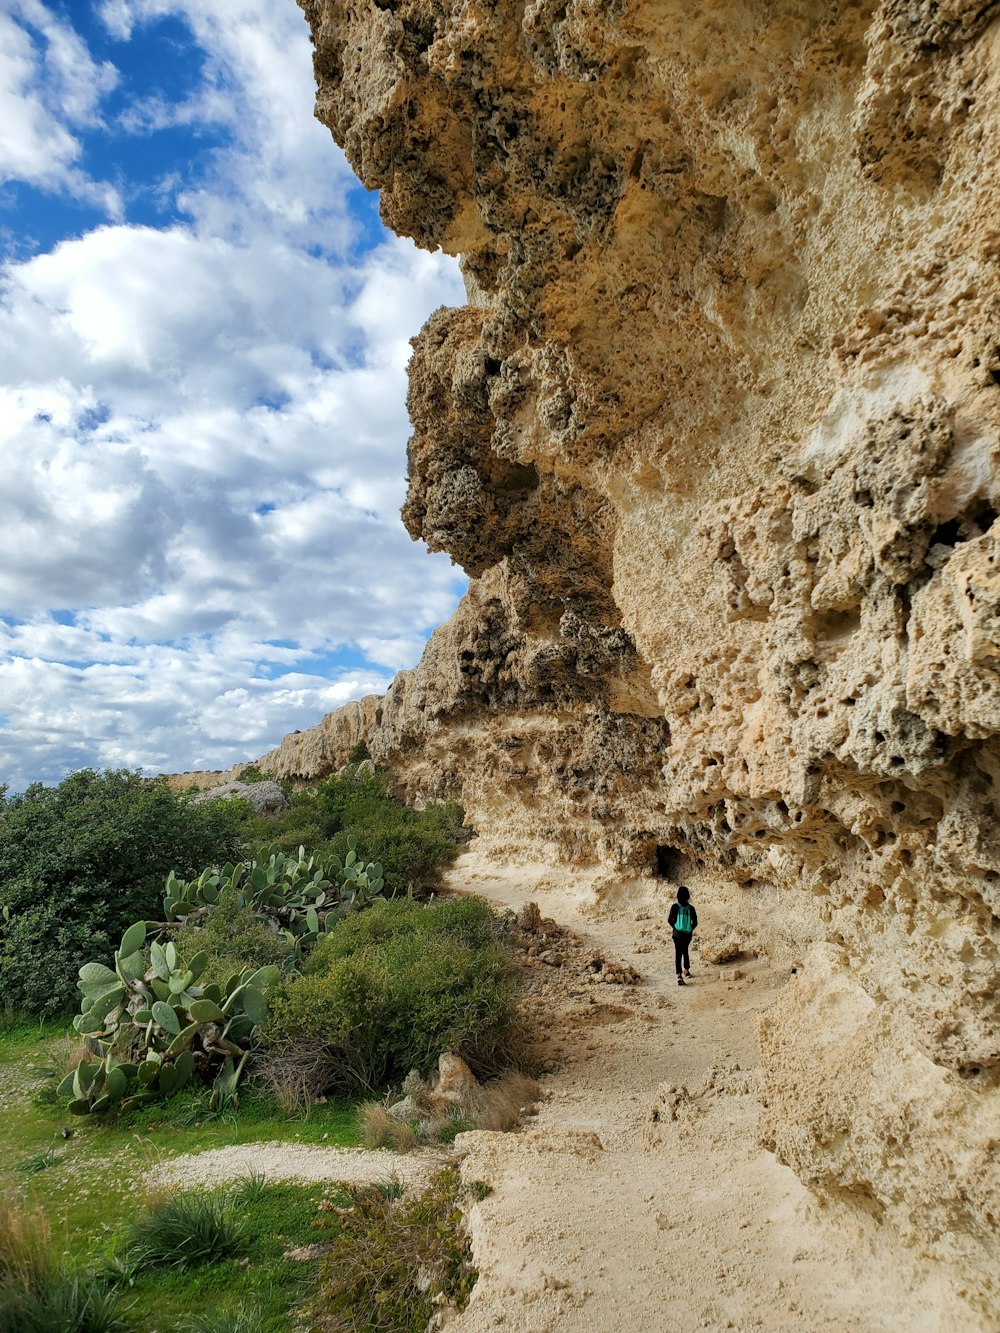 person in blue jacket walking on brown dirt road between brown rock formation under blue and